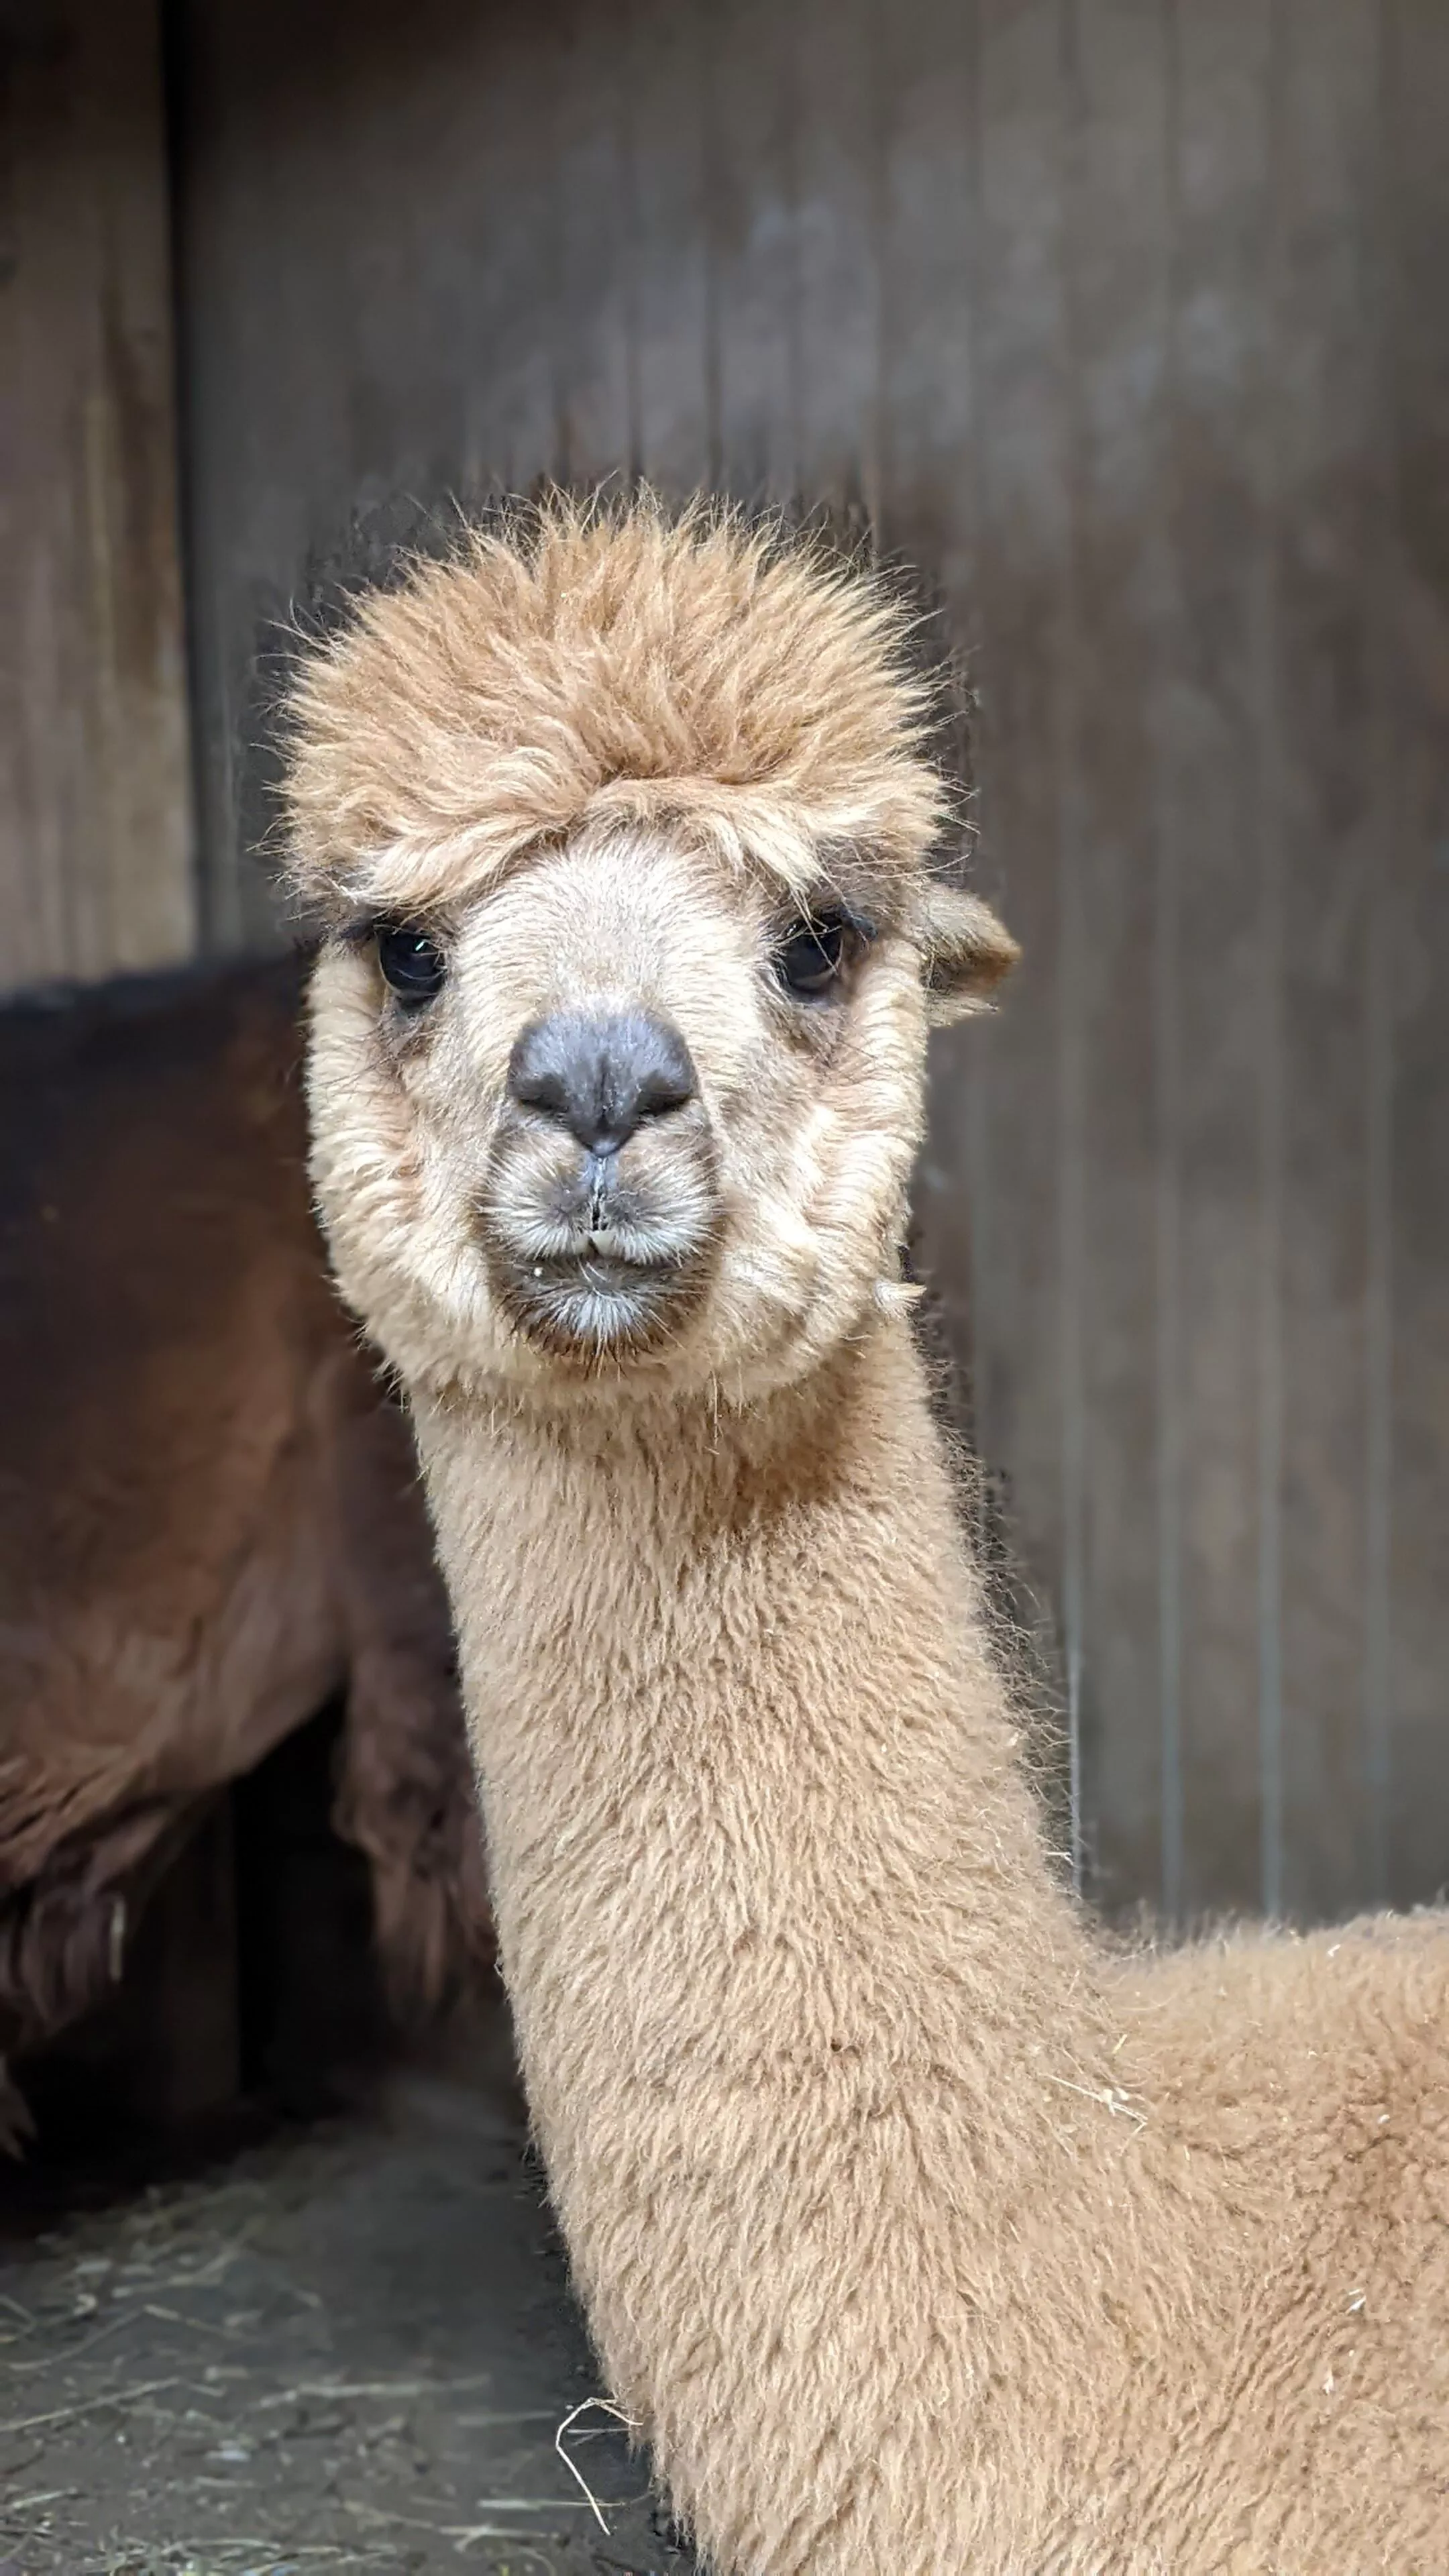 A portrait image of an alpaca named Clare